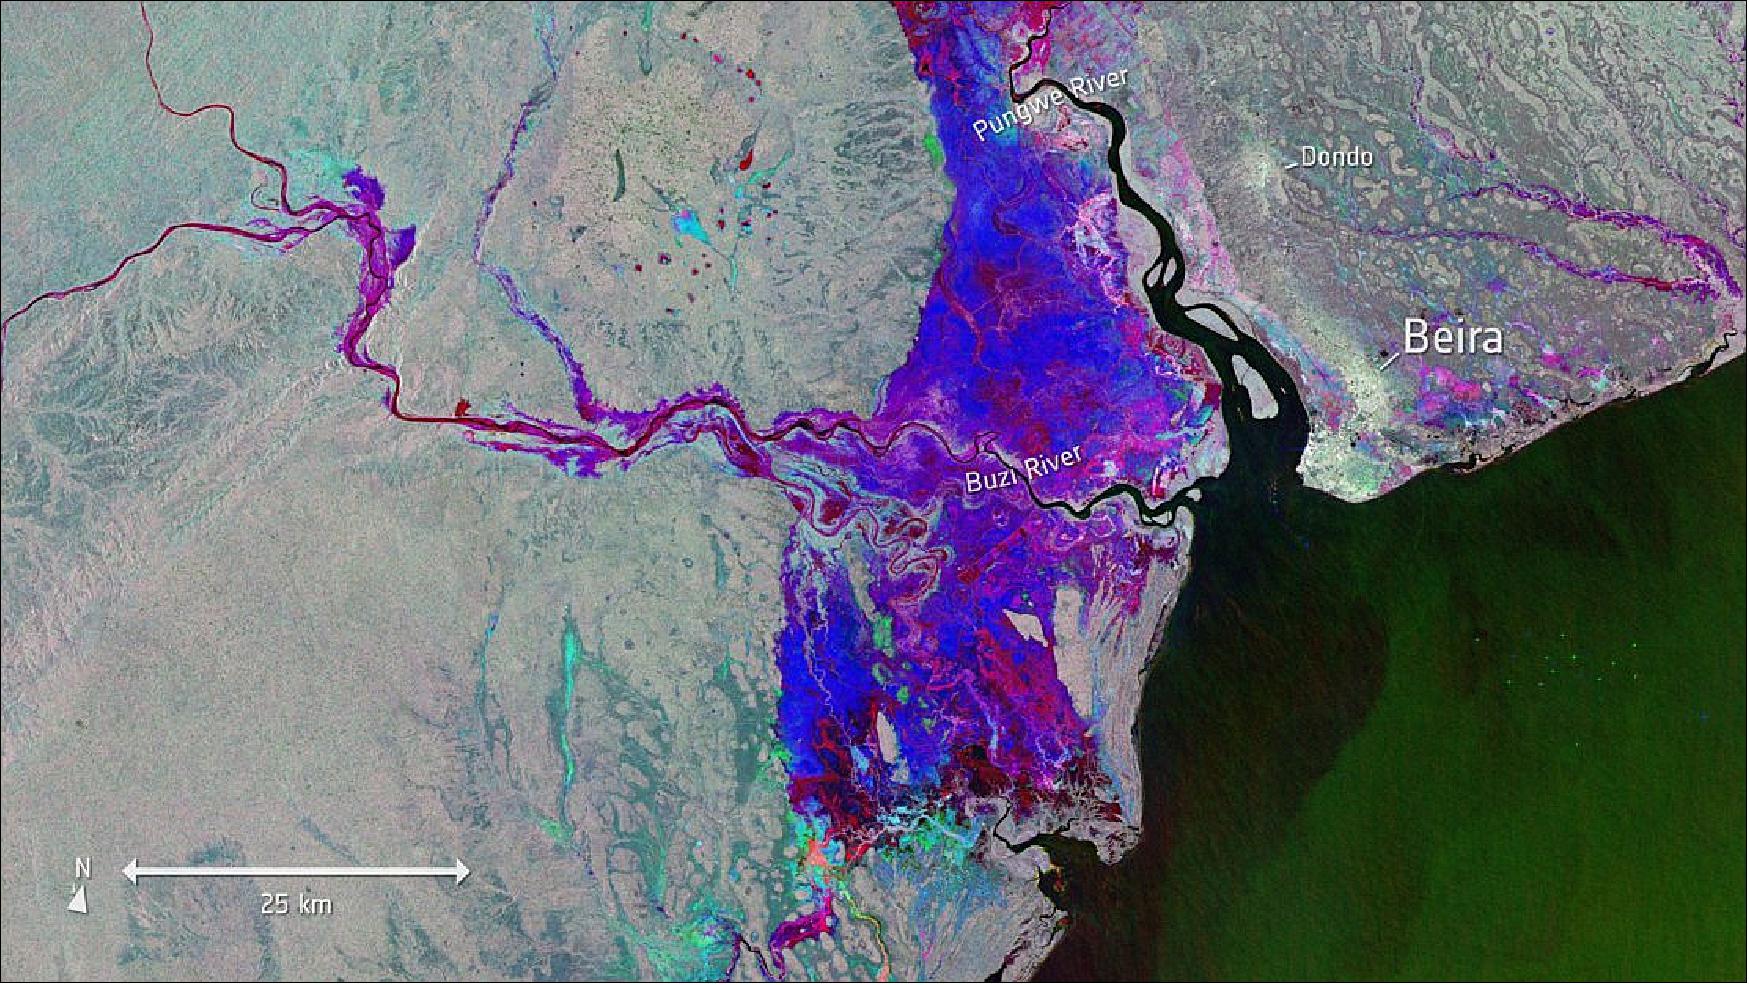 Figure 23: This Copernicus Sentinel-1 image indicates where the flood waters are finally beginning to recede west of the port city of Beira in Mozambique. The image merges three separate satellite radar images from before the storm on 13 March, from one of the days when the floods were at their worst on 19 March, and as the waters are beginning to drain away on 25 March. The blue-purple color indicates where floodwater is receding, while areas shown in red are still underwater (image credit: ESA, the image contains modified Copernicus Sentinel data (2019), processed by ESA, CC BY-SA 3.0 IGO)